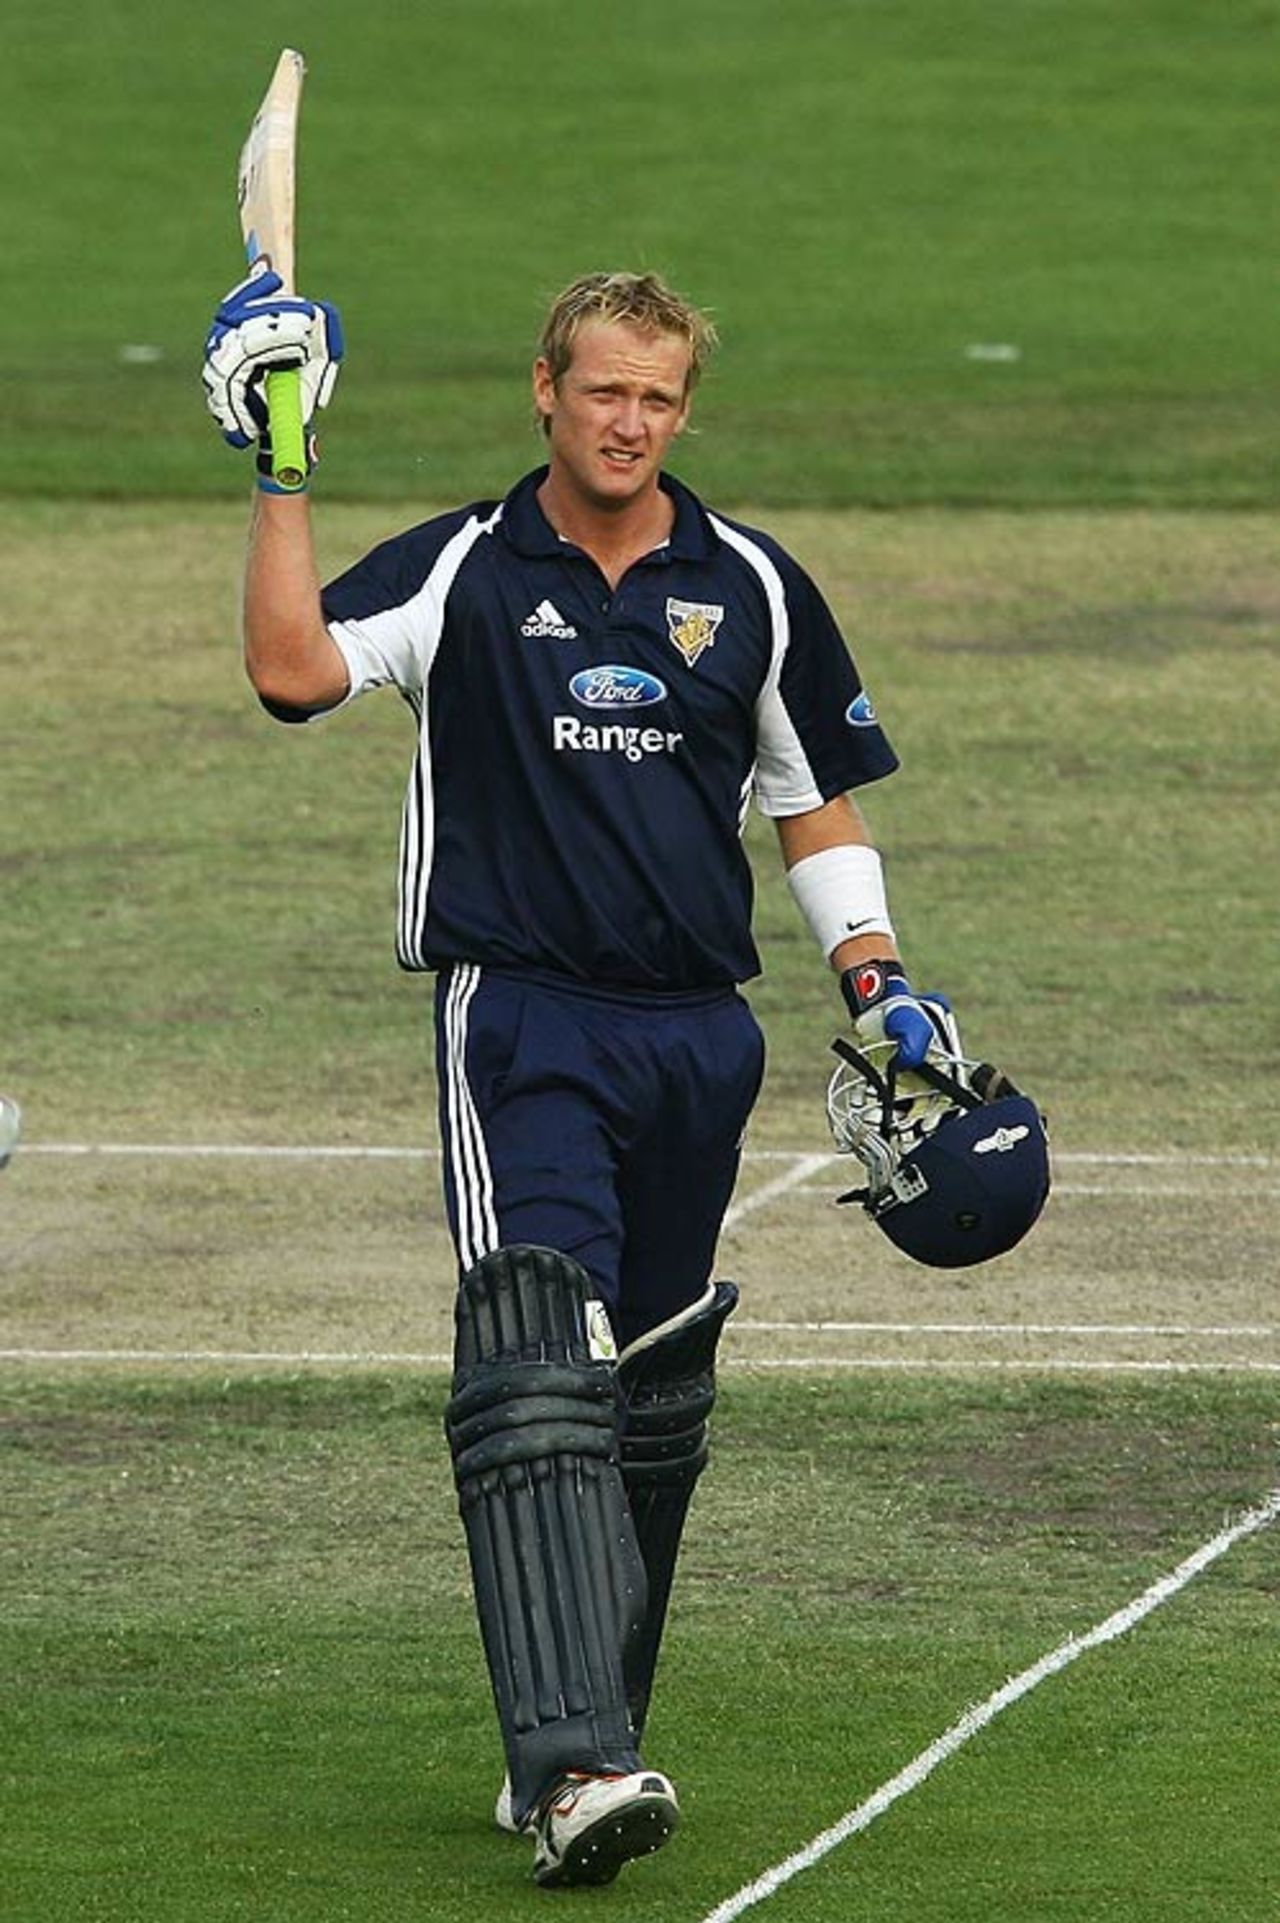 Cameron White raises his bat after reaching his century, New South Wales v Victoria, Ford Ranger Cup, Canberra, December 10, 2006